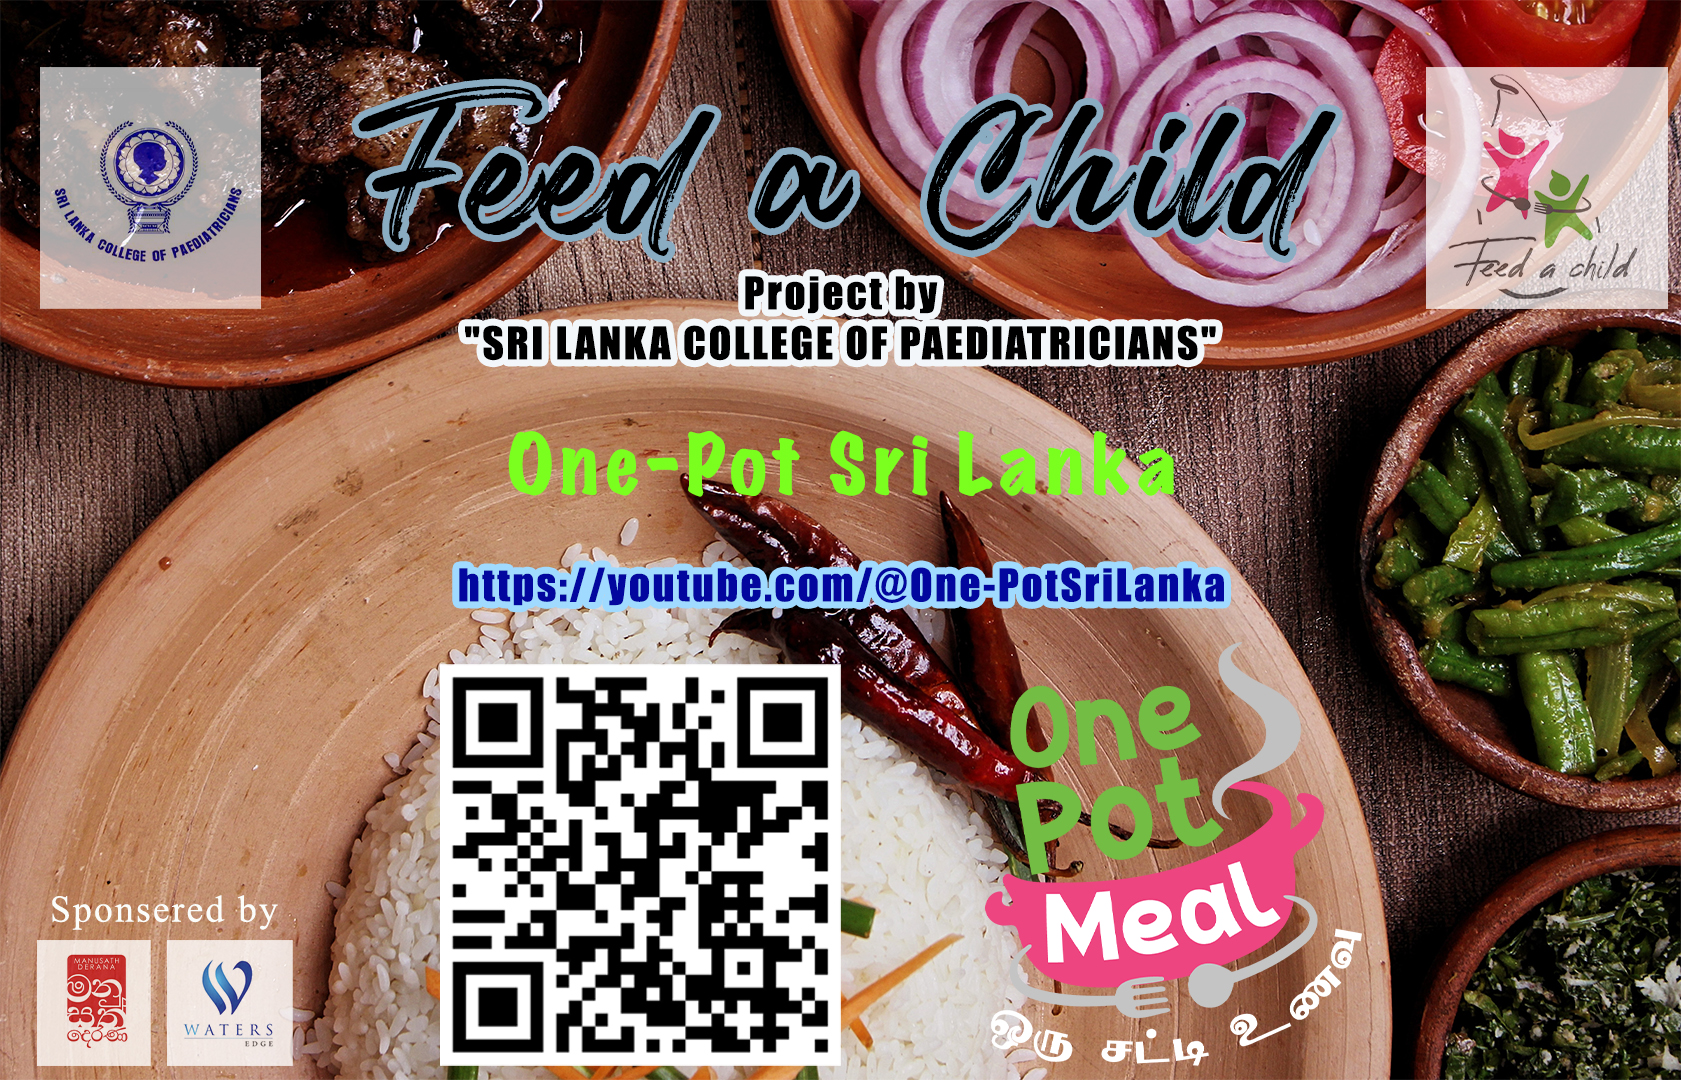 Feed a Child - Tamil